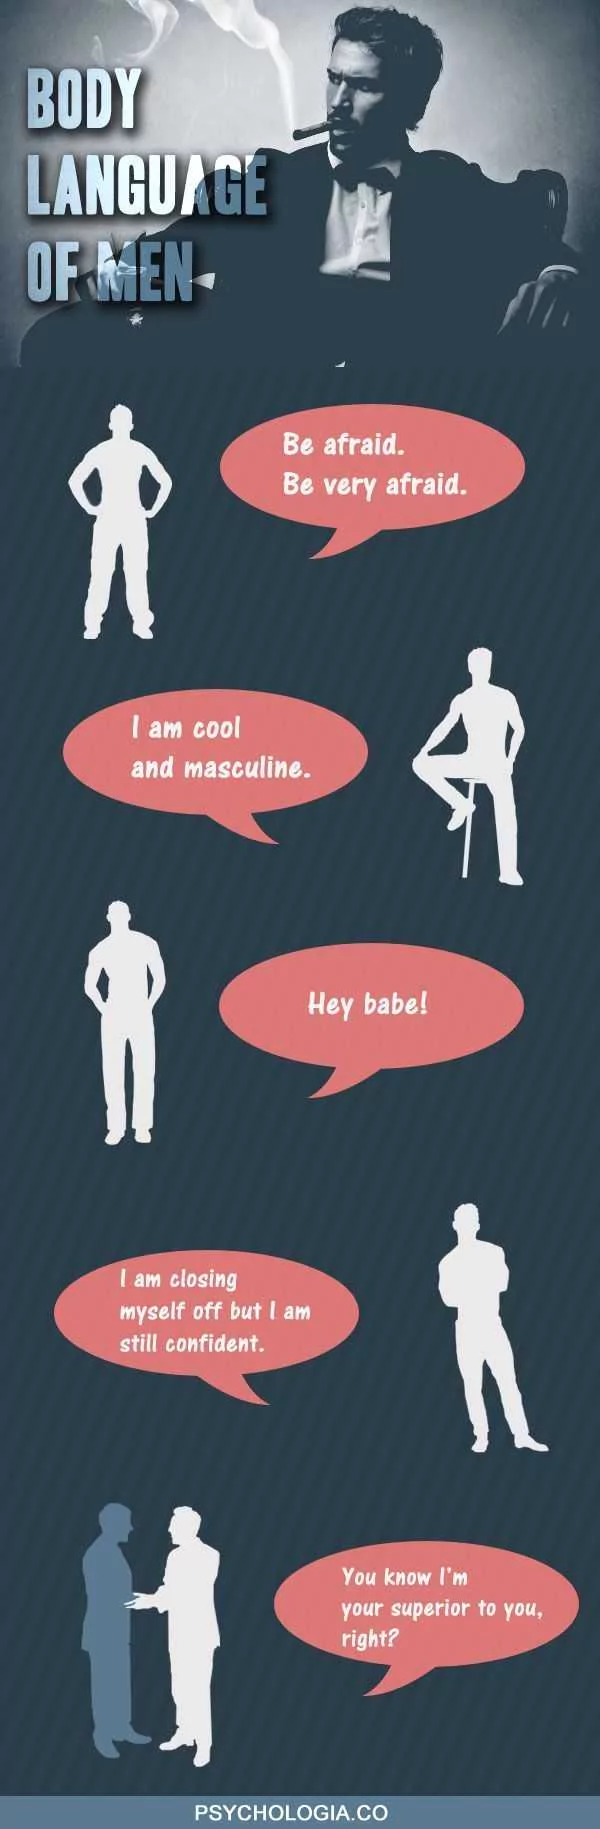 14. The Body Language Of Men - 19 Body Language Infographics that Will